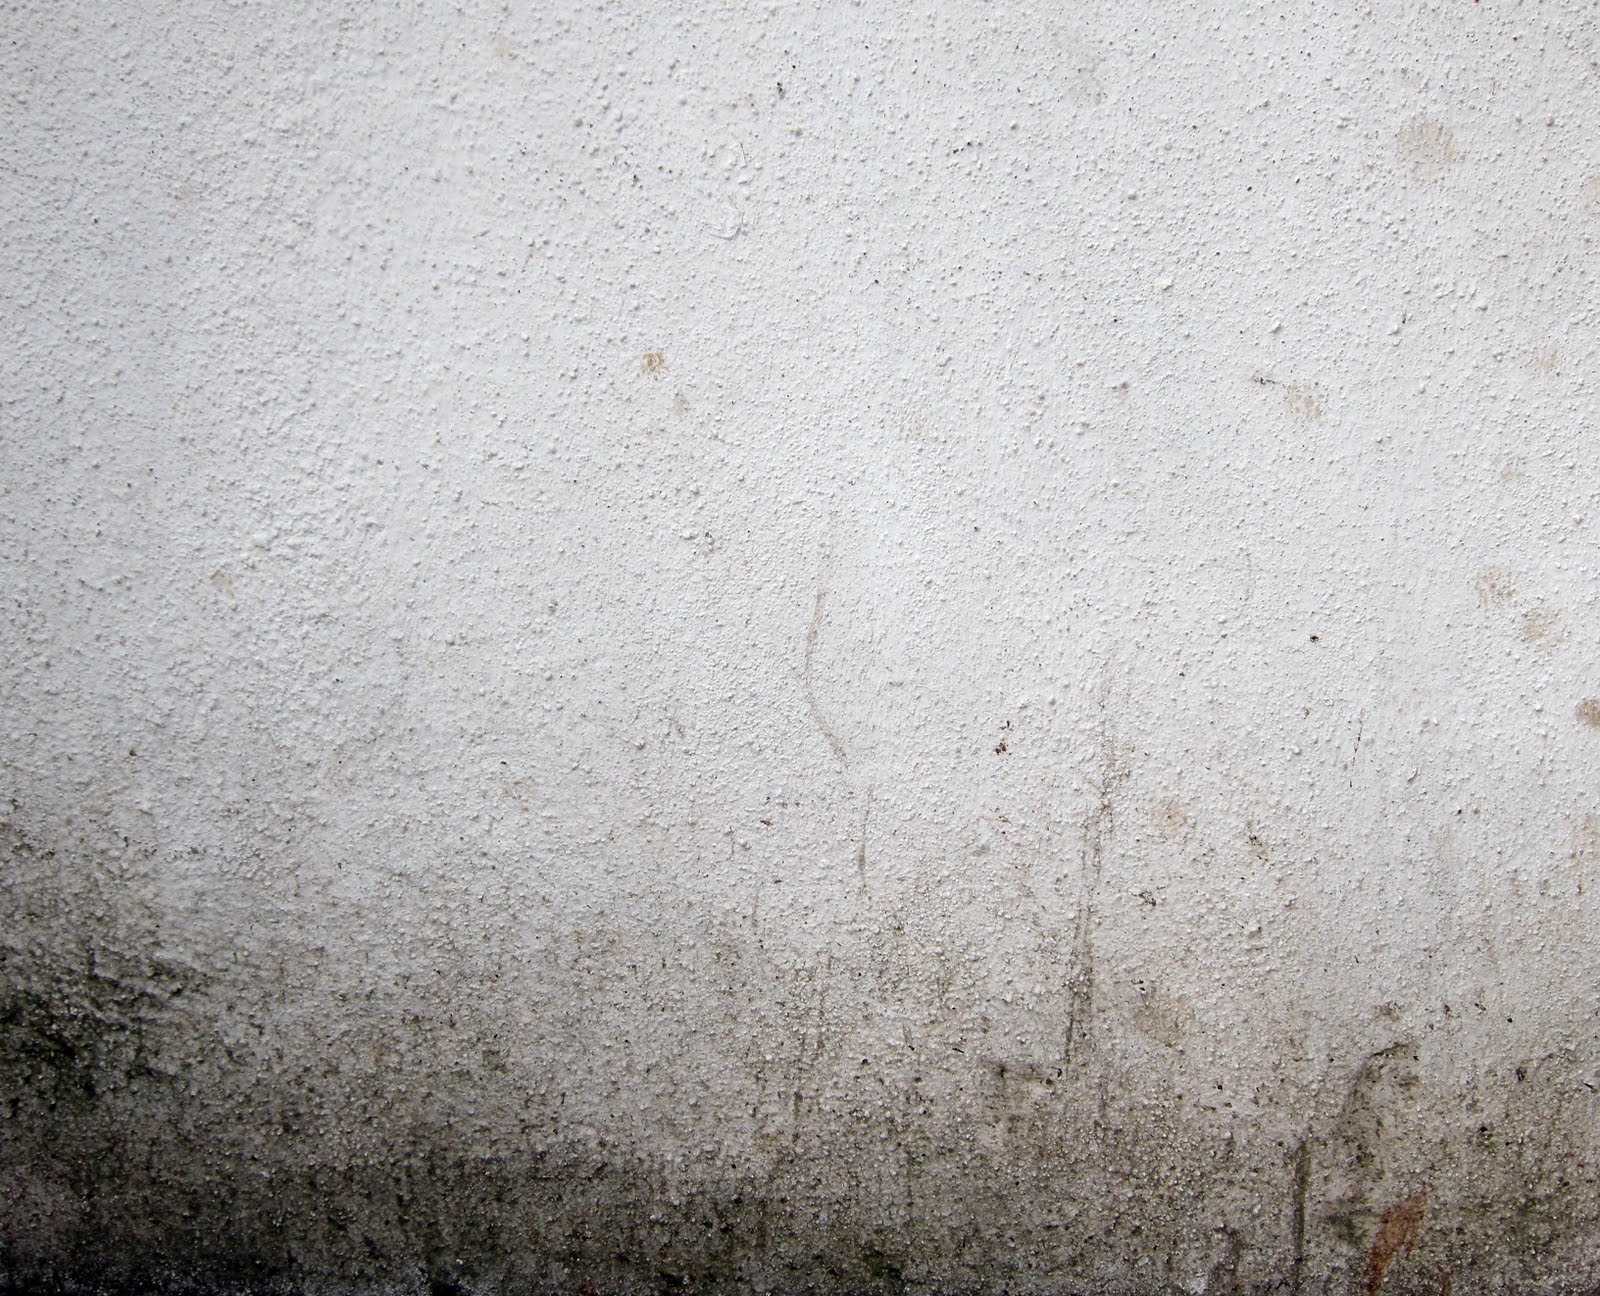 Dirty White Wall Texture Plaster And Stucco Leaves Babaimage Stock ...